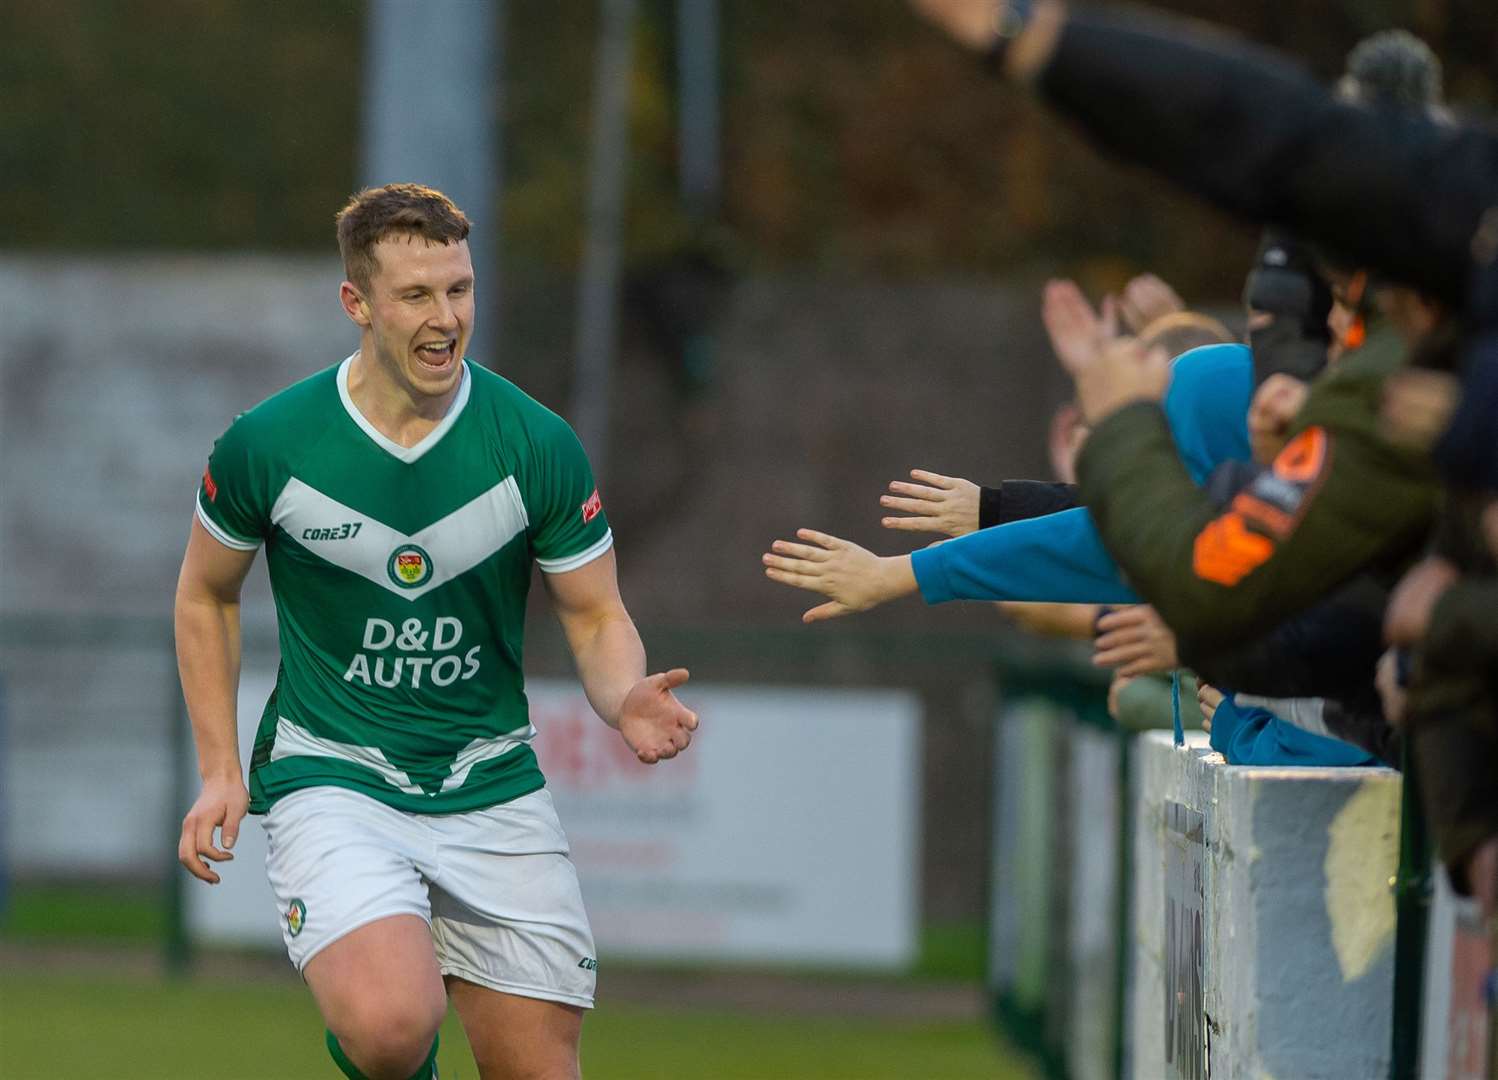 Wisson celebrates scoring at Homelands in front of the home fans. Picture: Ian Scammell